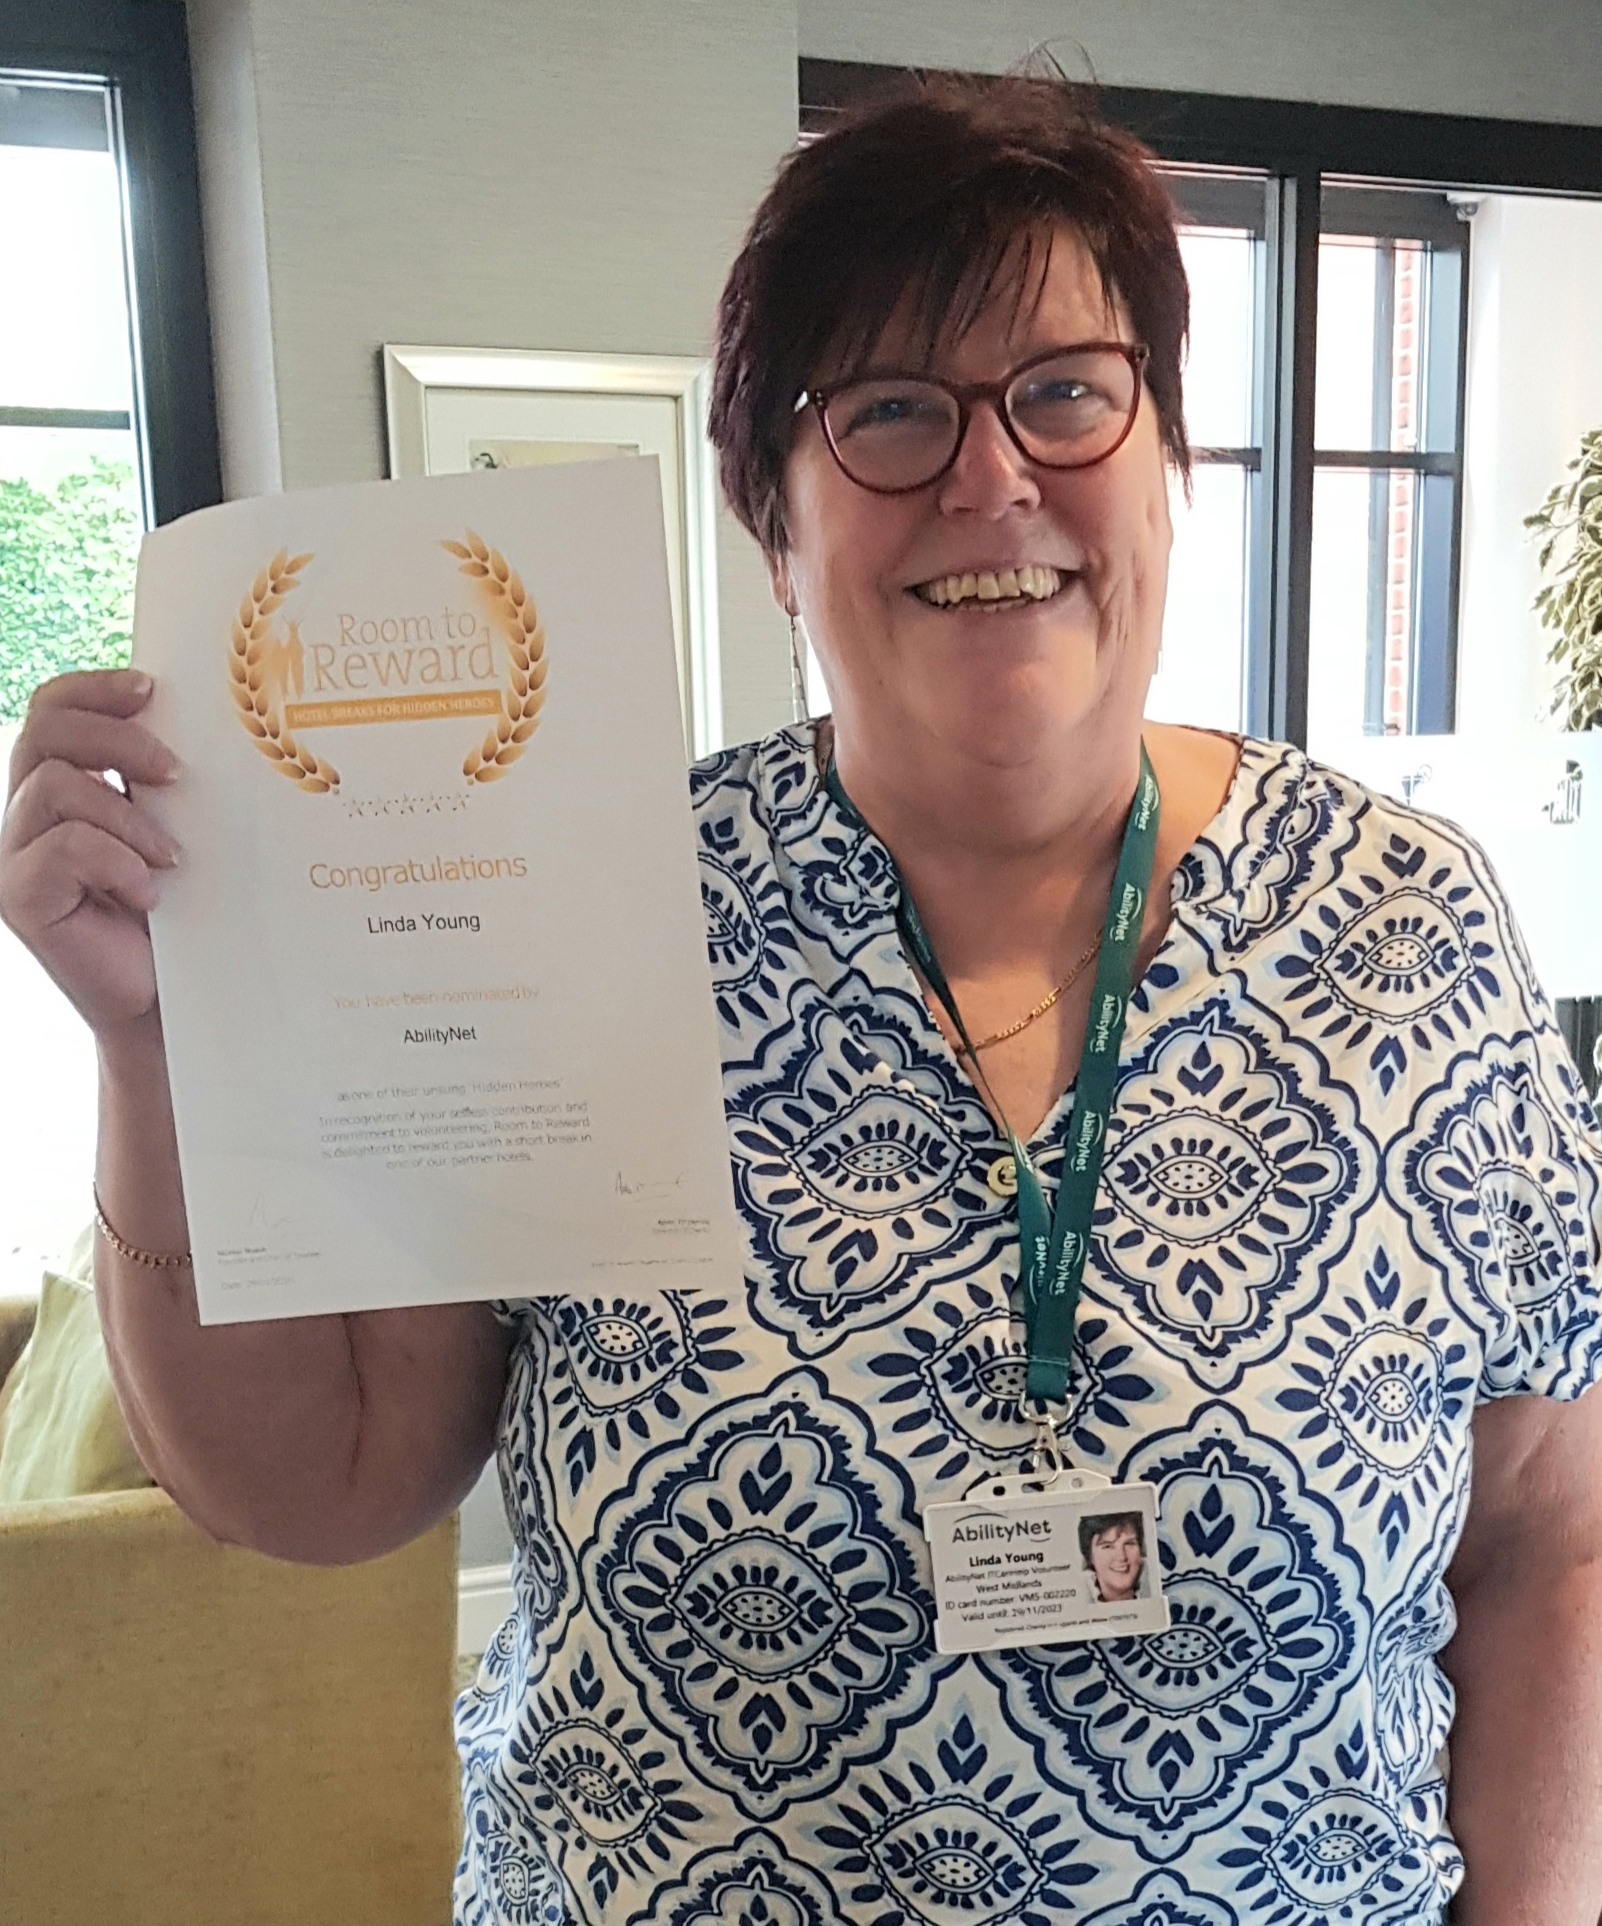 Linda Young smiling, holding her Room to Reward certificate